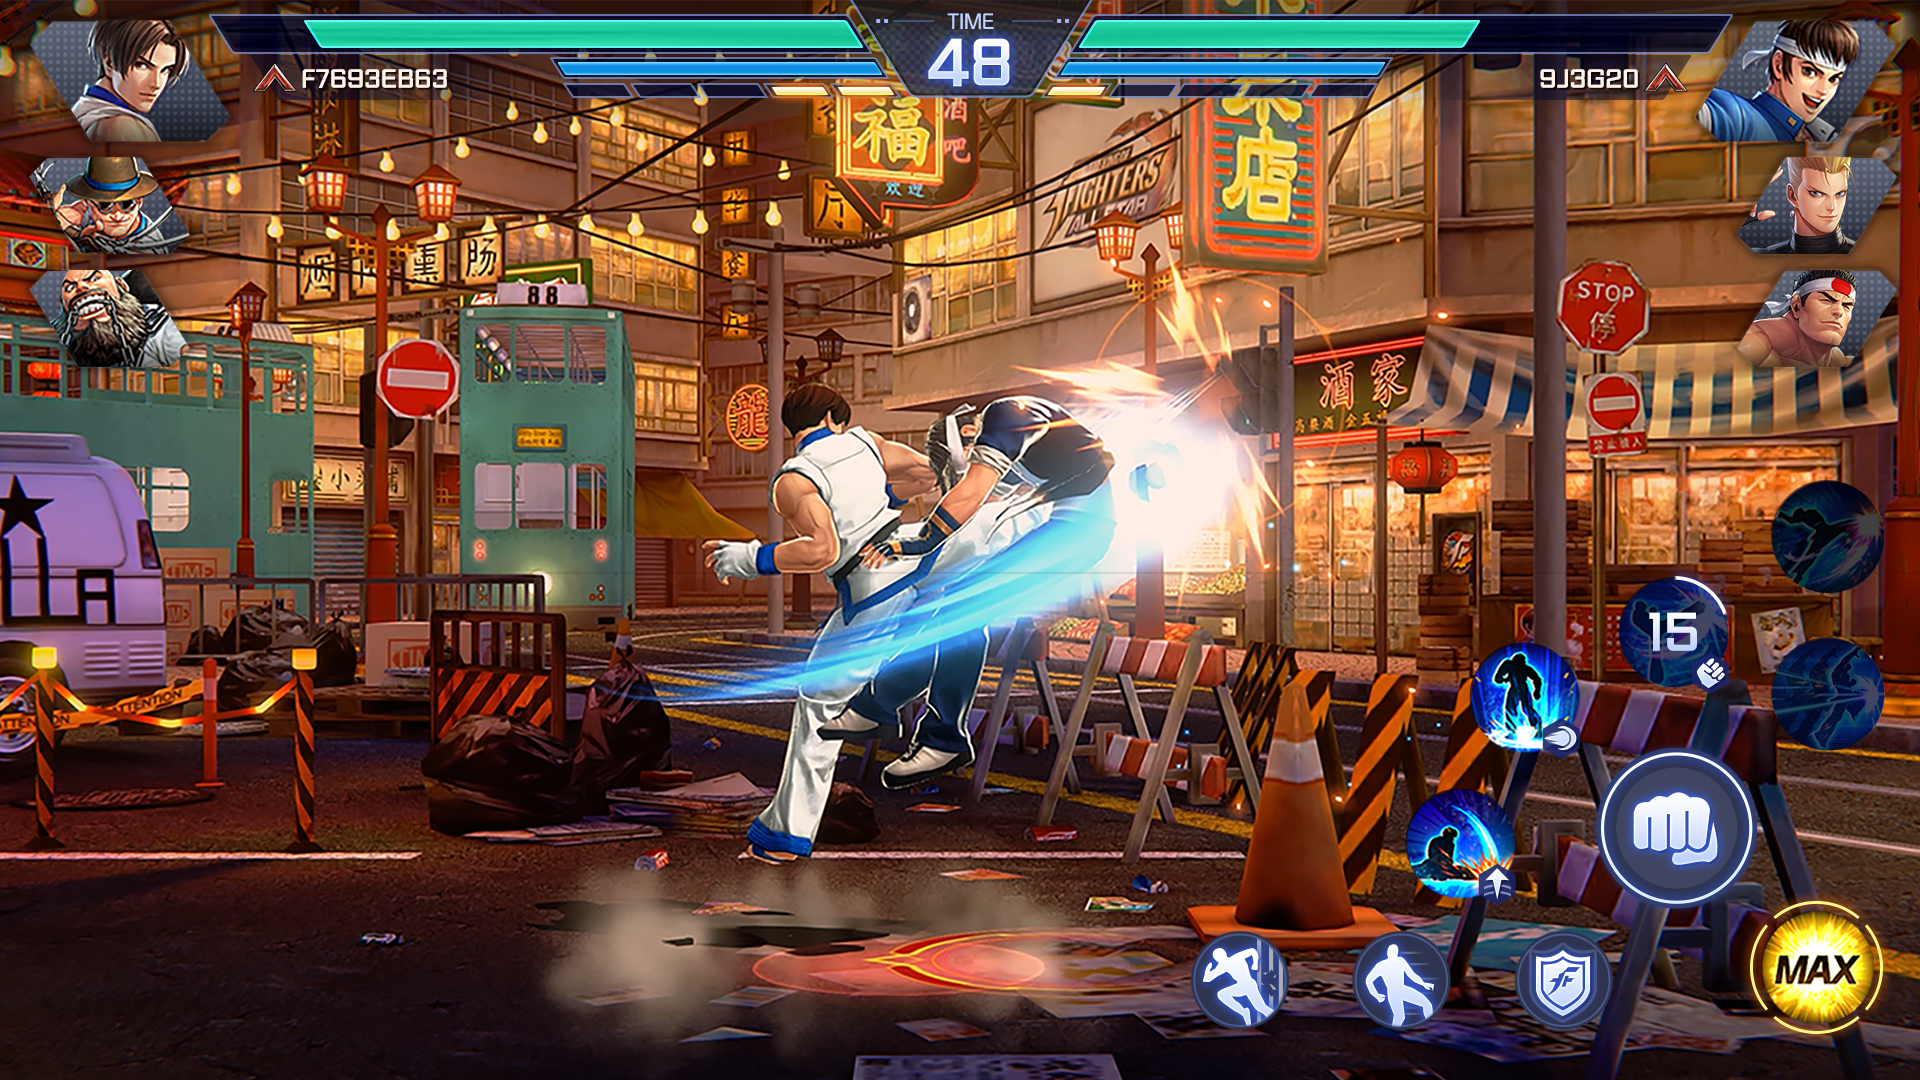 Download & Play The King of Fighters '97 on PC & Mac (Emulator)